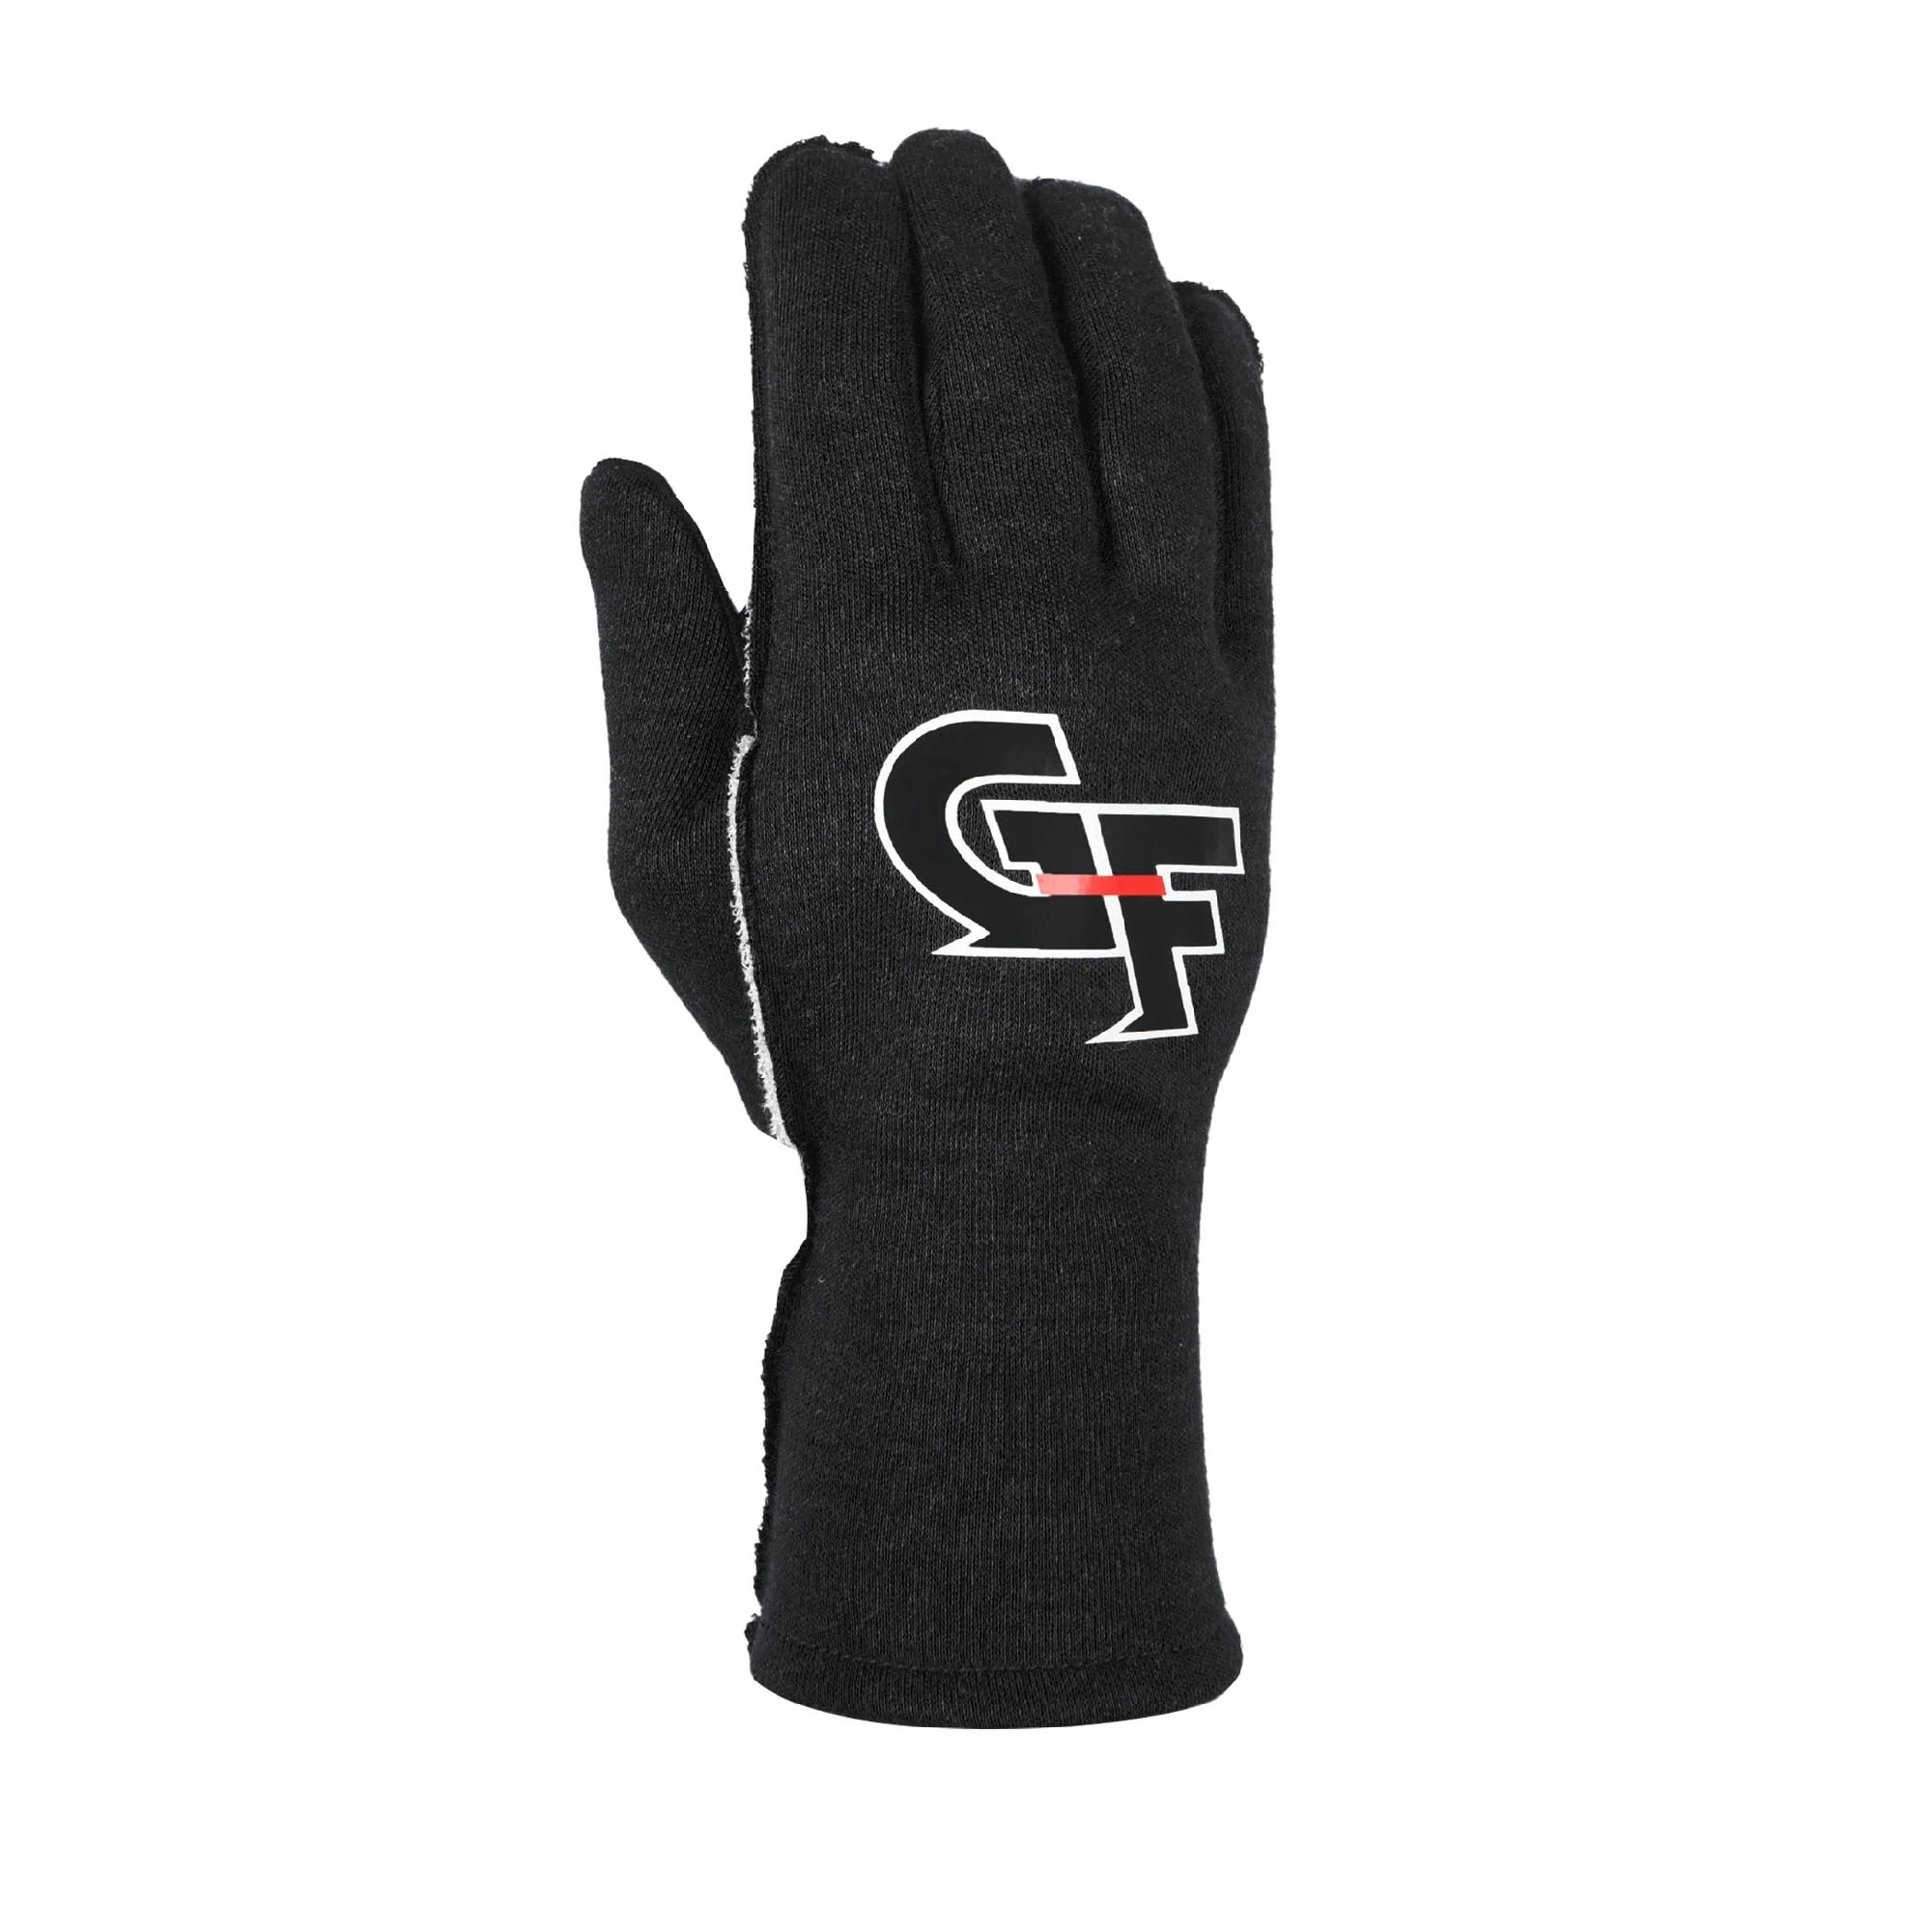 G-FORCE Racing Gear Gloves G-Limit X-Small Black